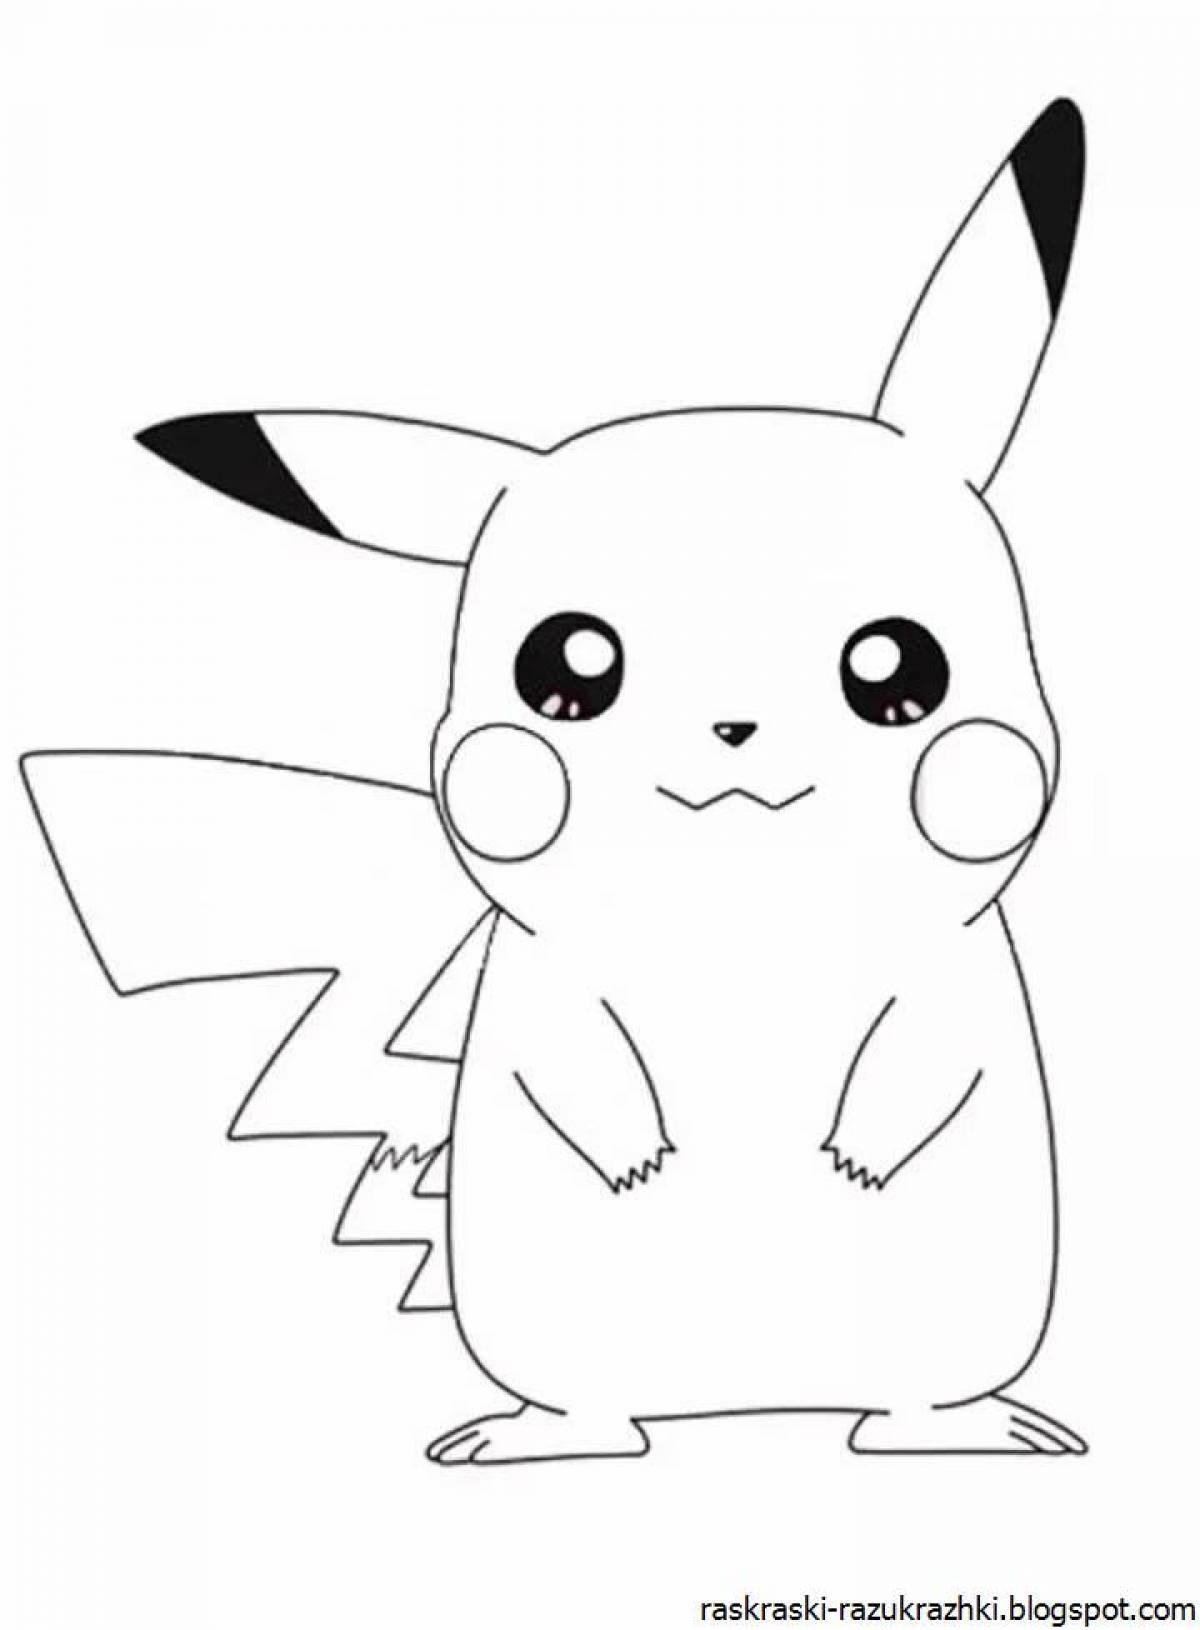 Animated pikachu coloring page for kids